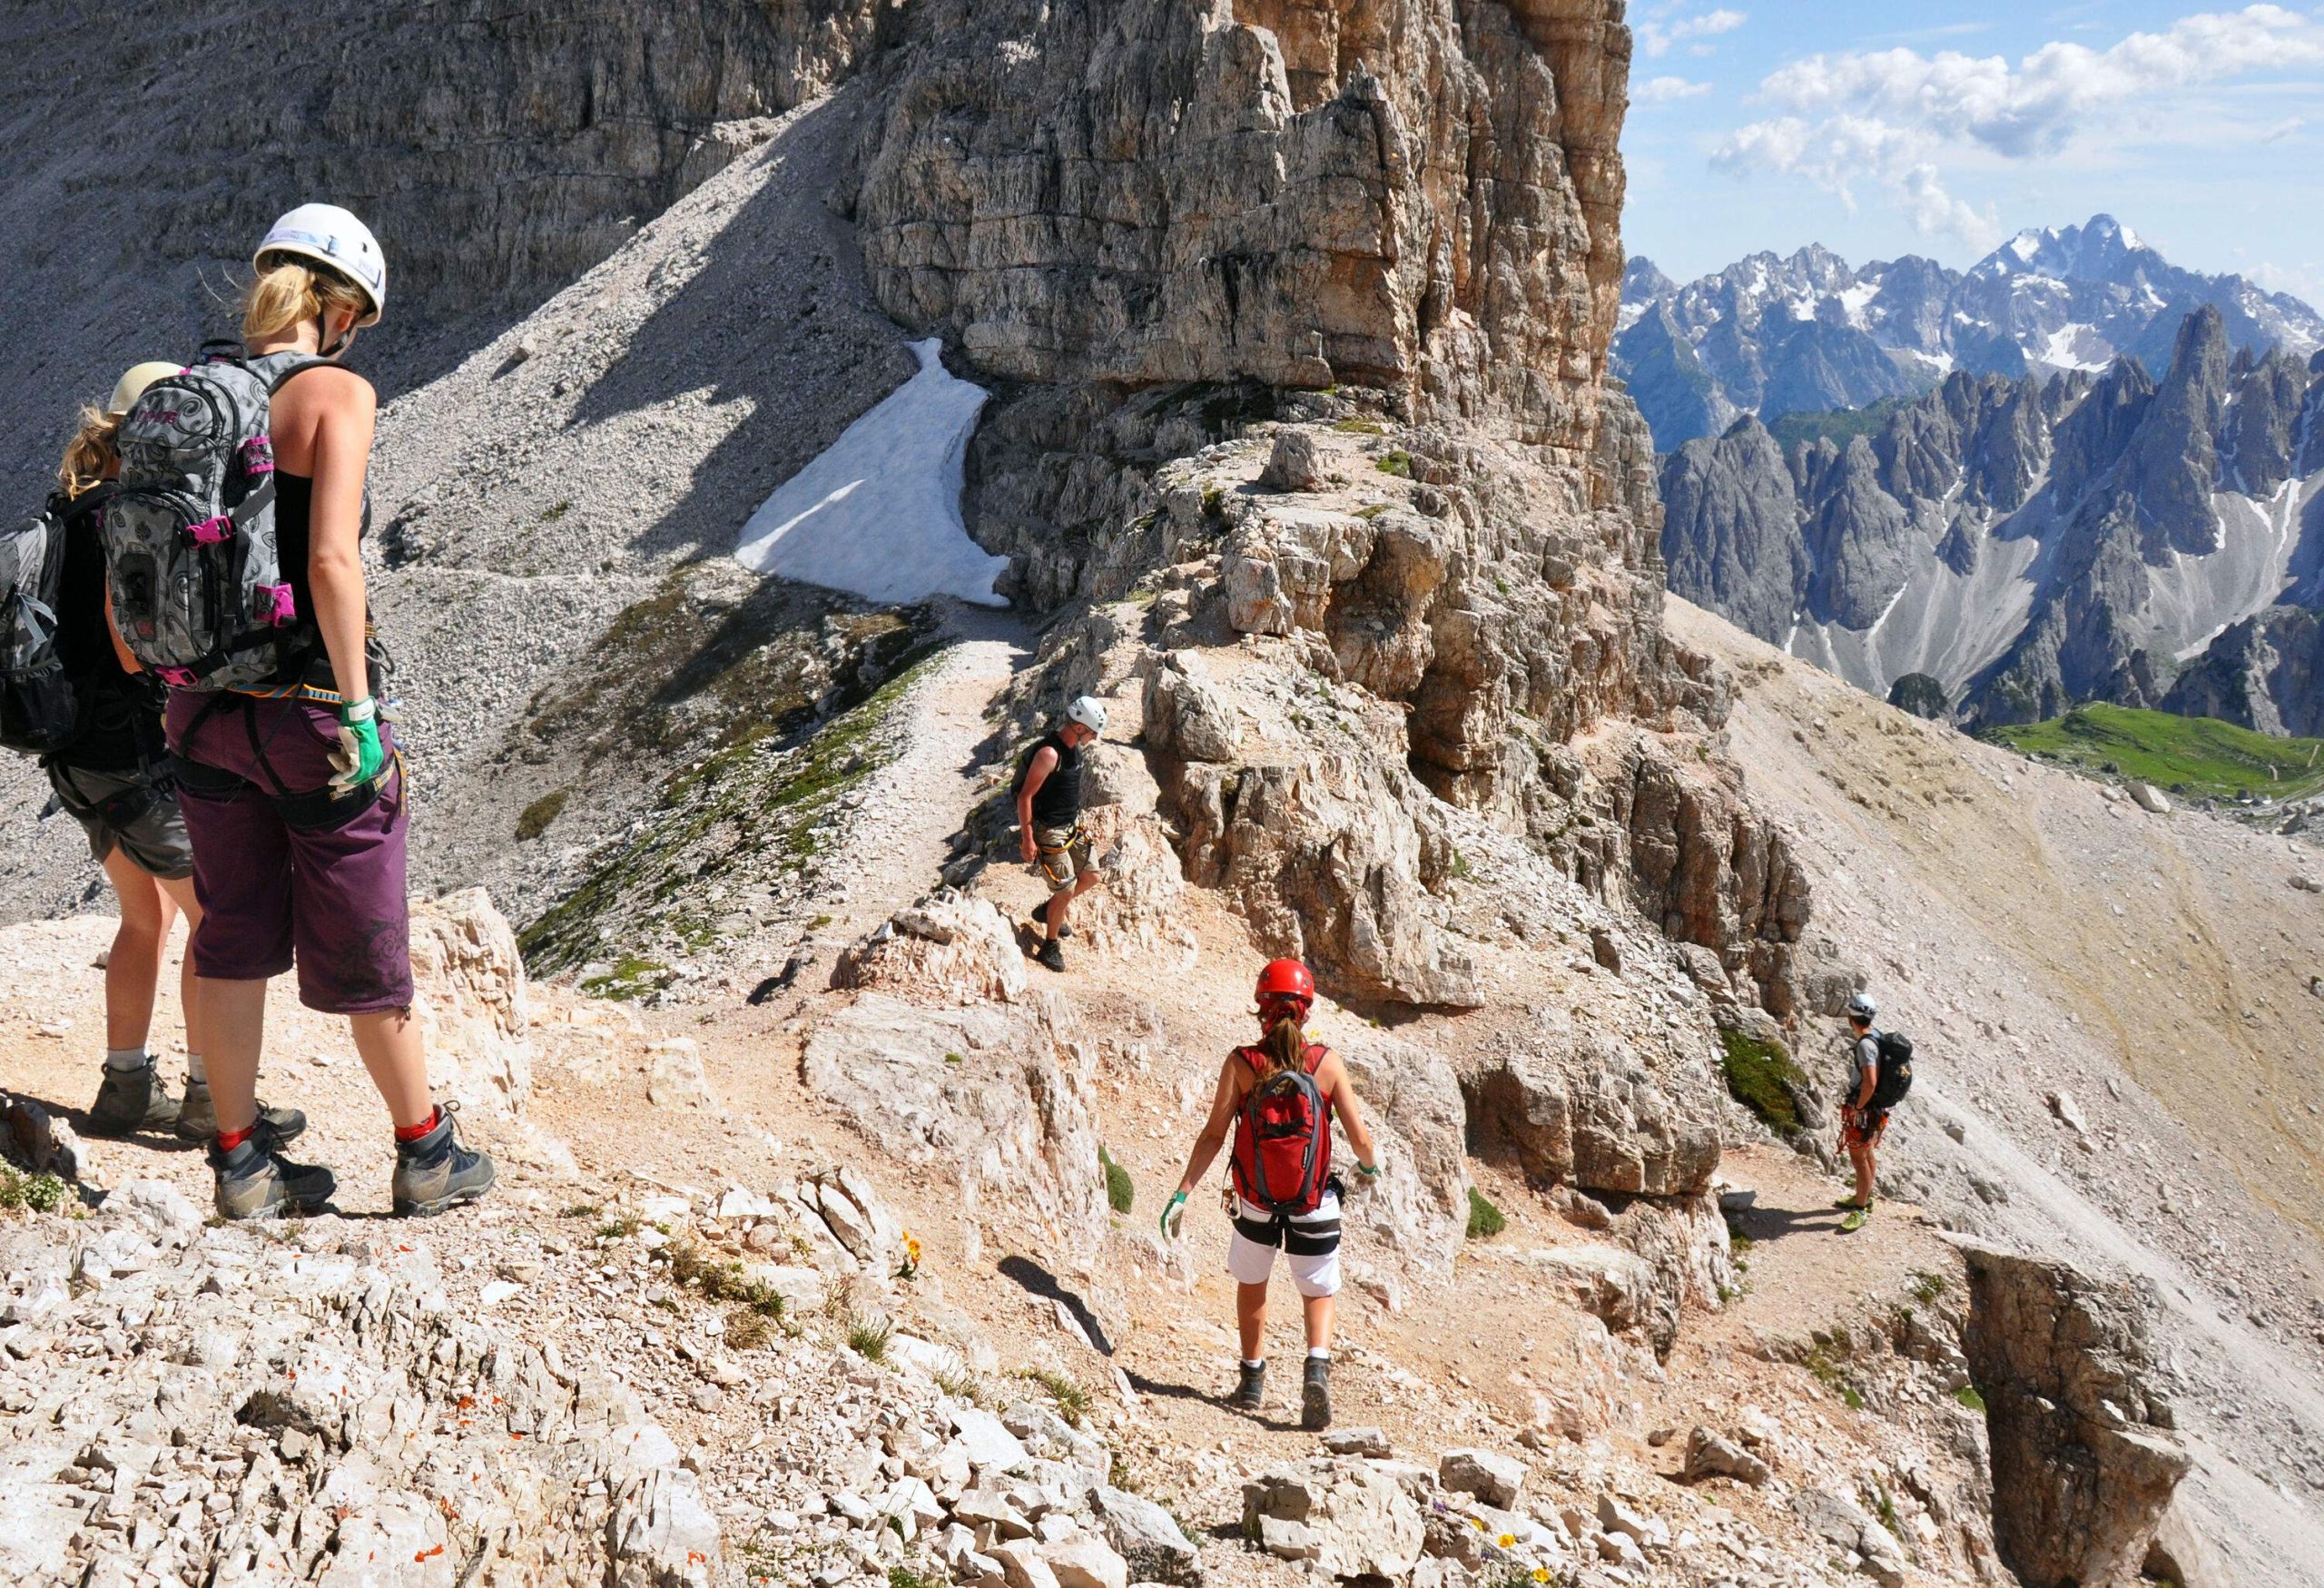 A group of people in helmets and backpacks are hiking on a steep mountain in the daytime.